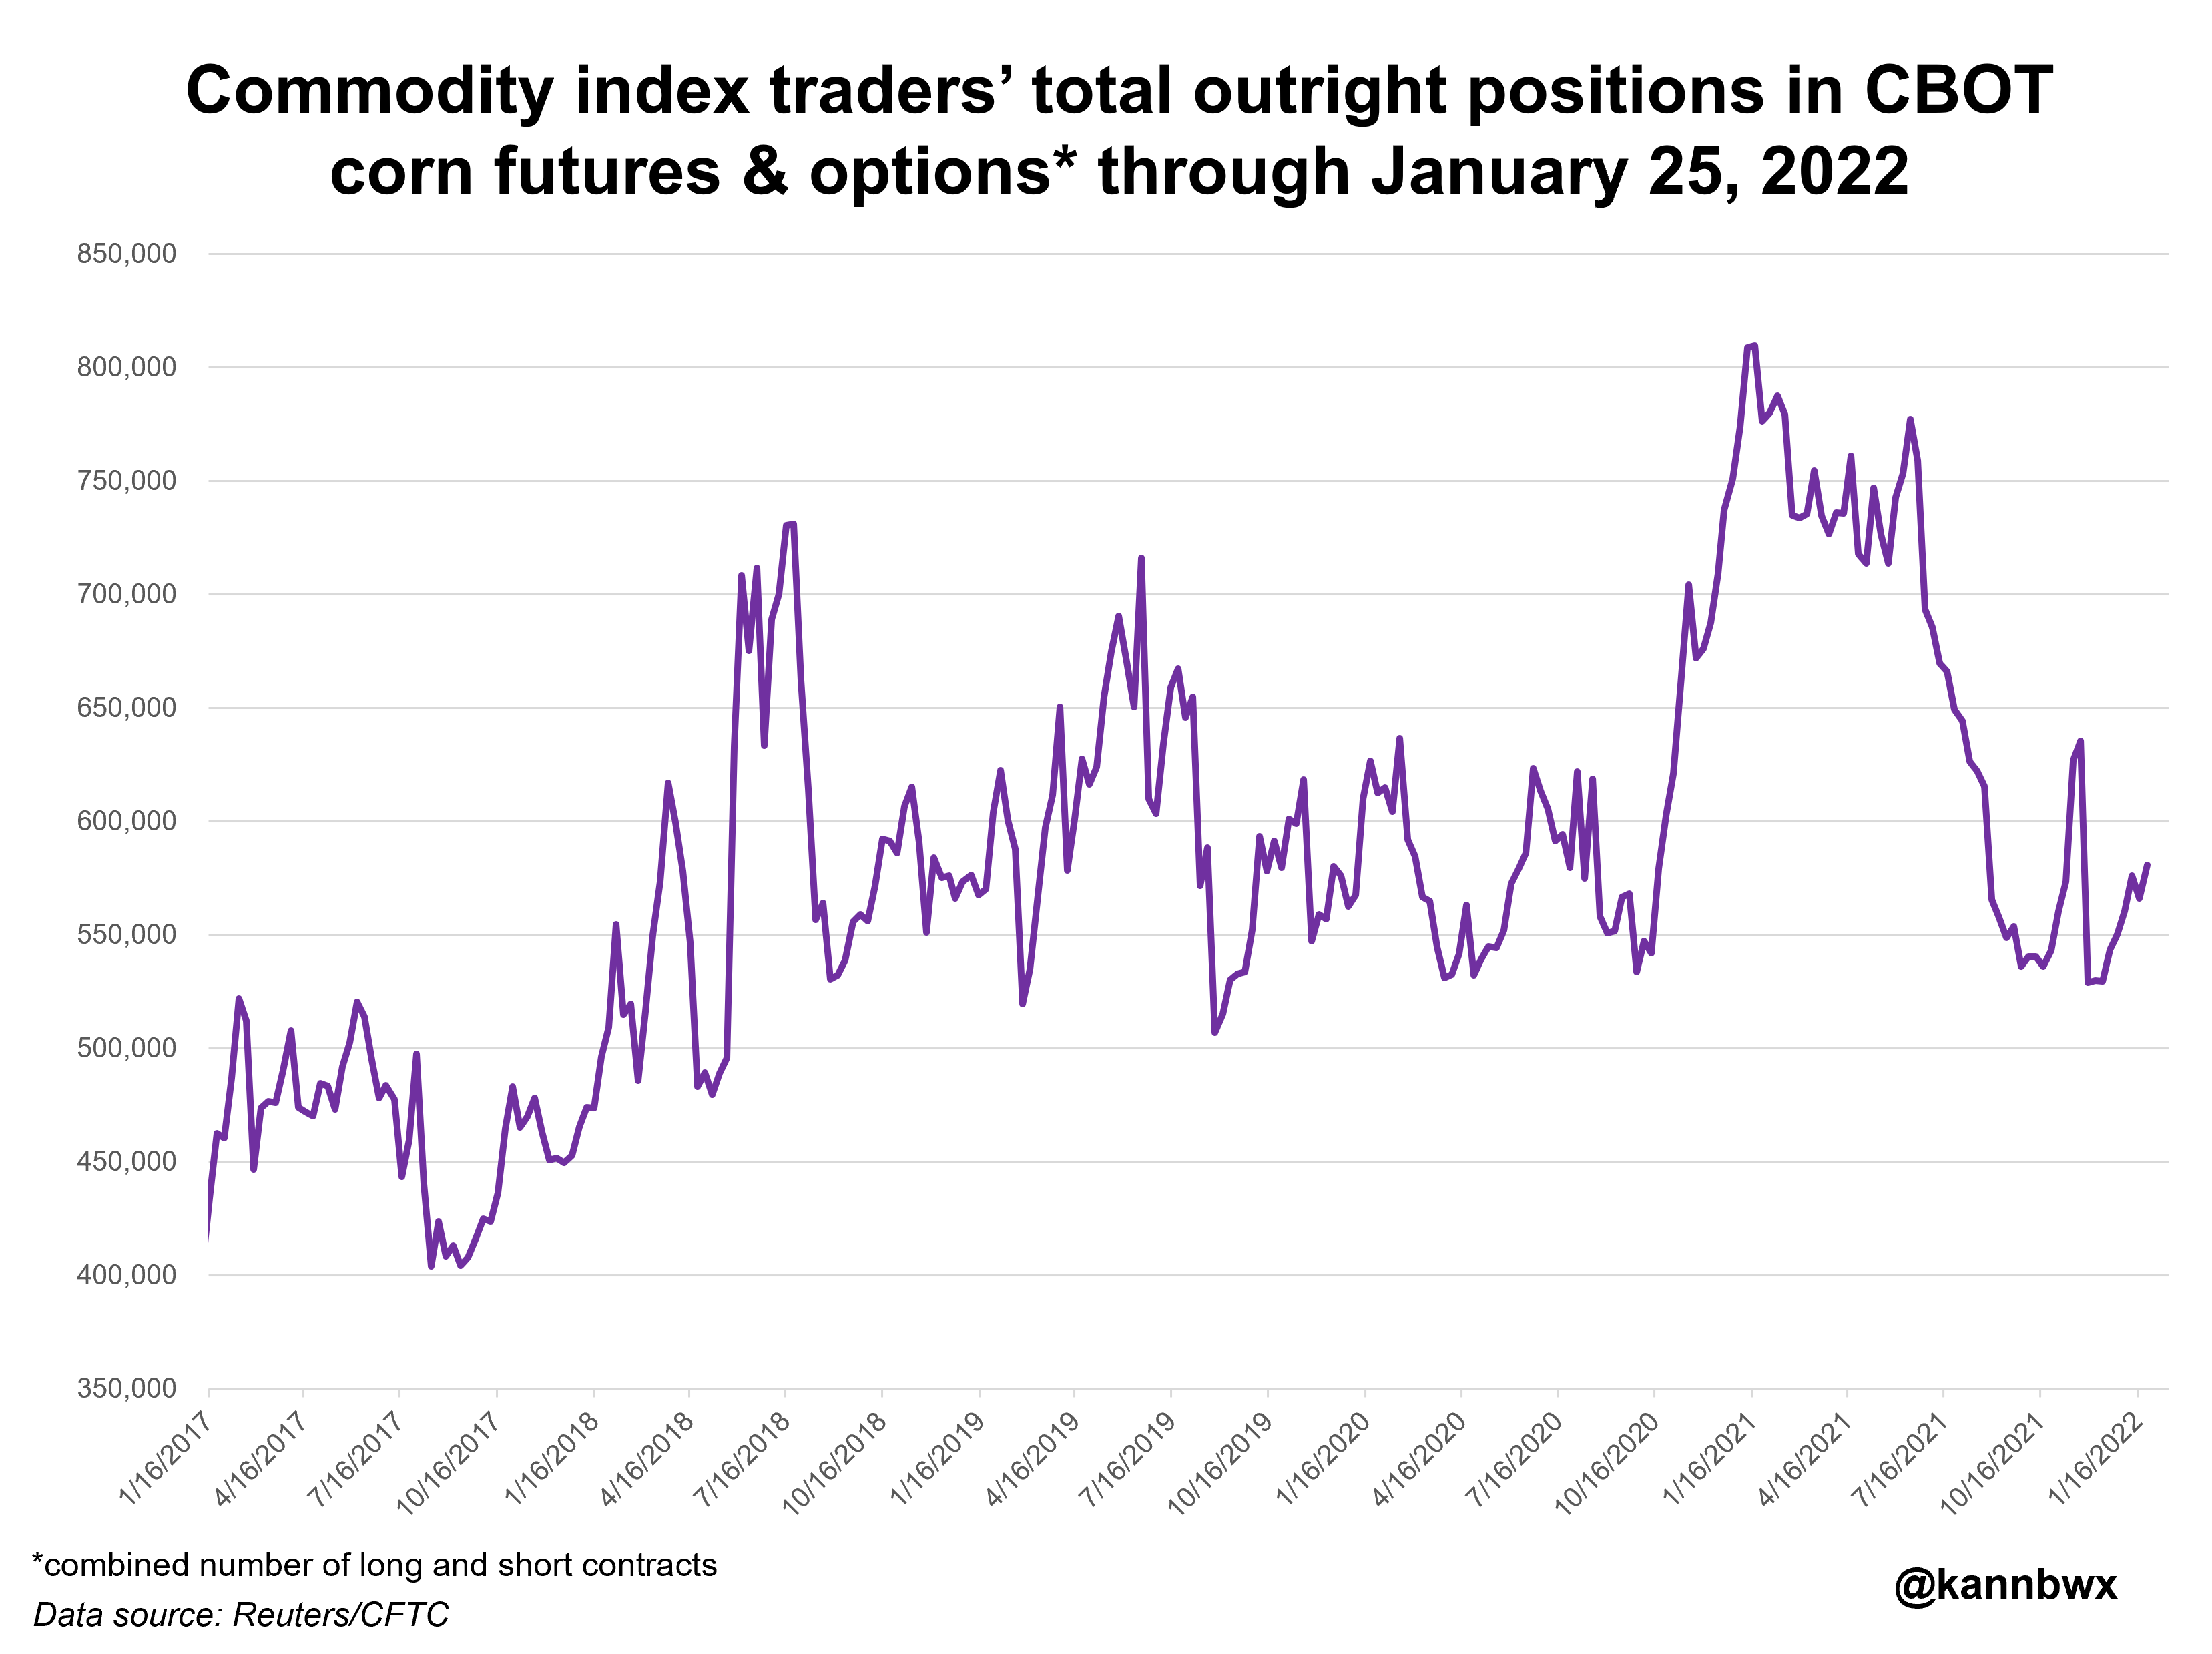 Commodity index tradersâ€™ total outright positions in CBOT corn futures and options